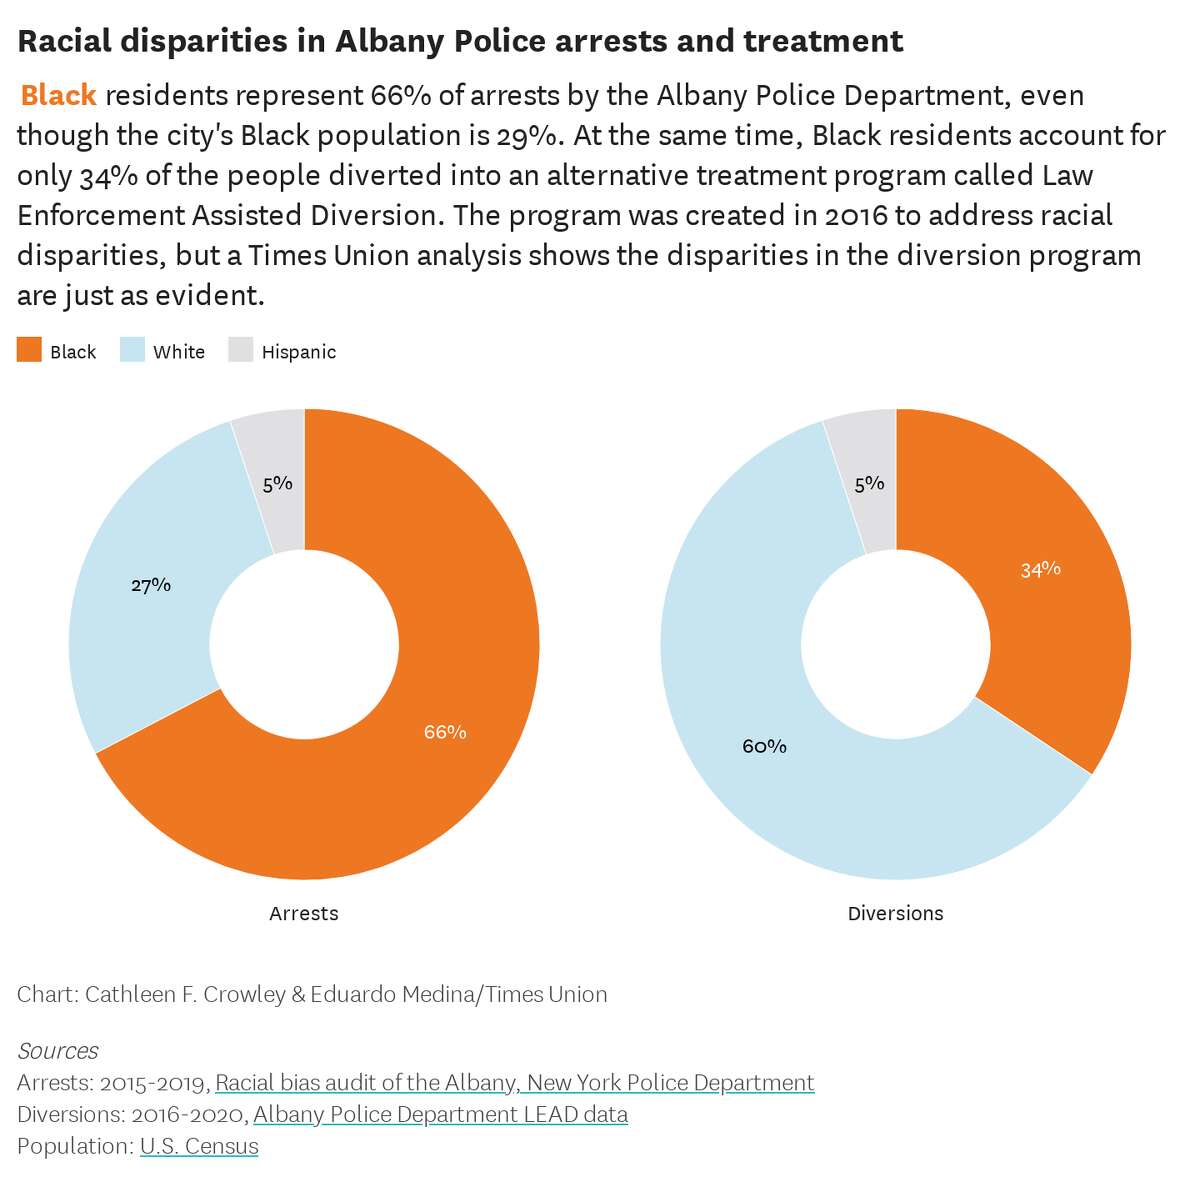 Black residents account for only 34% of the people diverted into an alternative treatment program called Law Enforcement Assisted Diversion. (Cathleen F. Crowley & Eduardo Medina / Times Union)